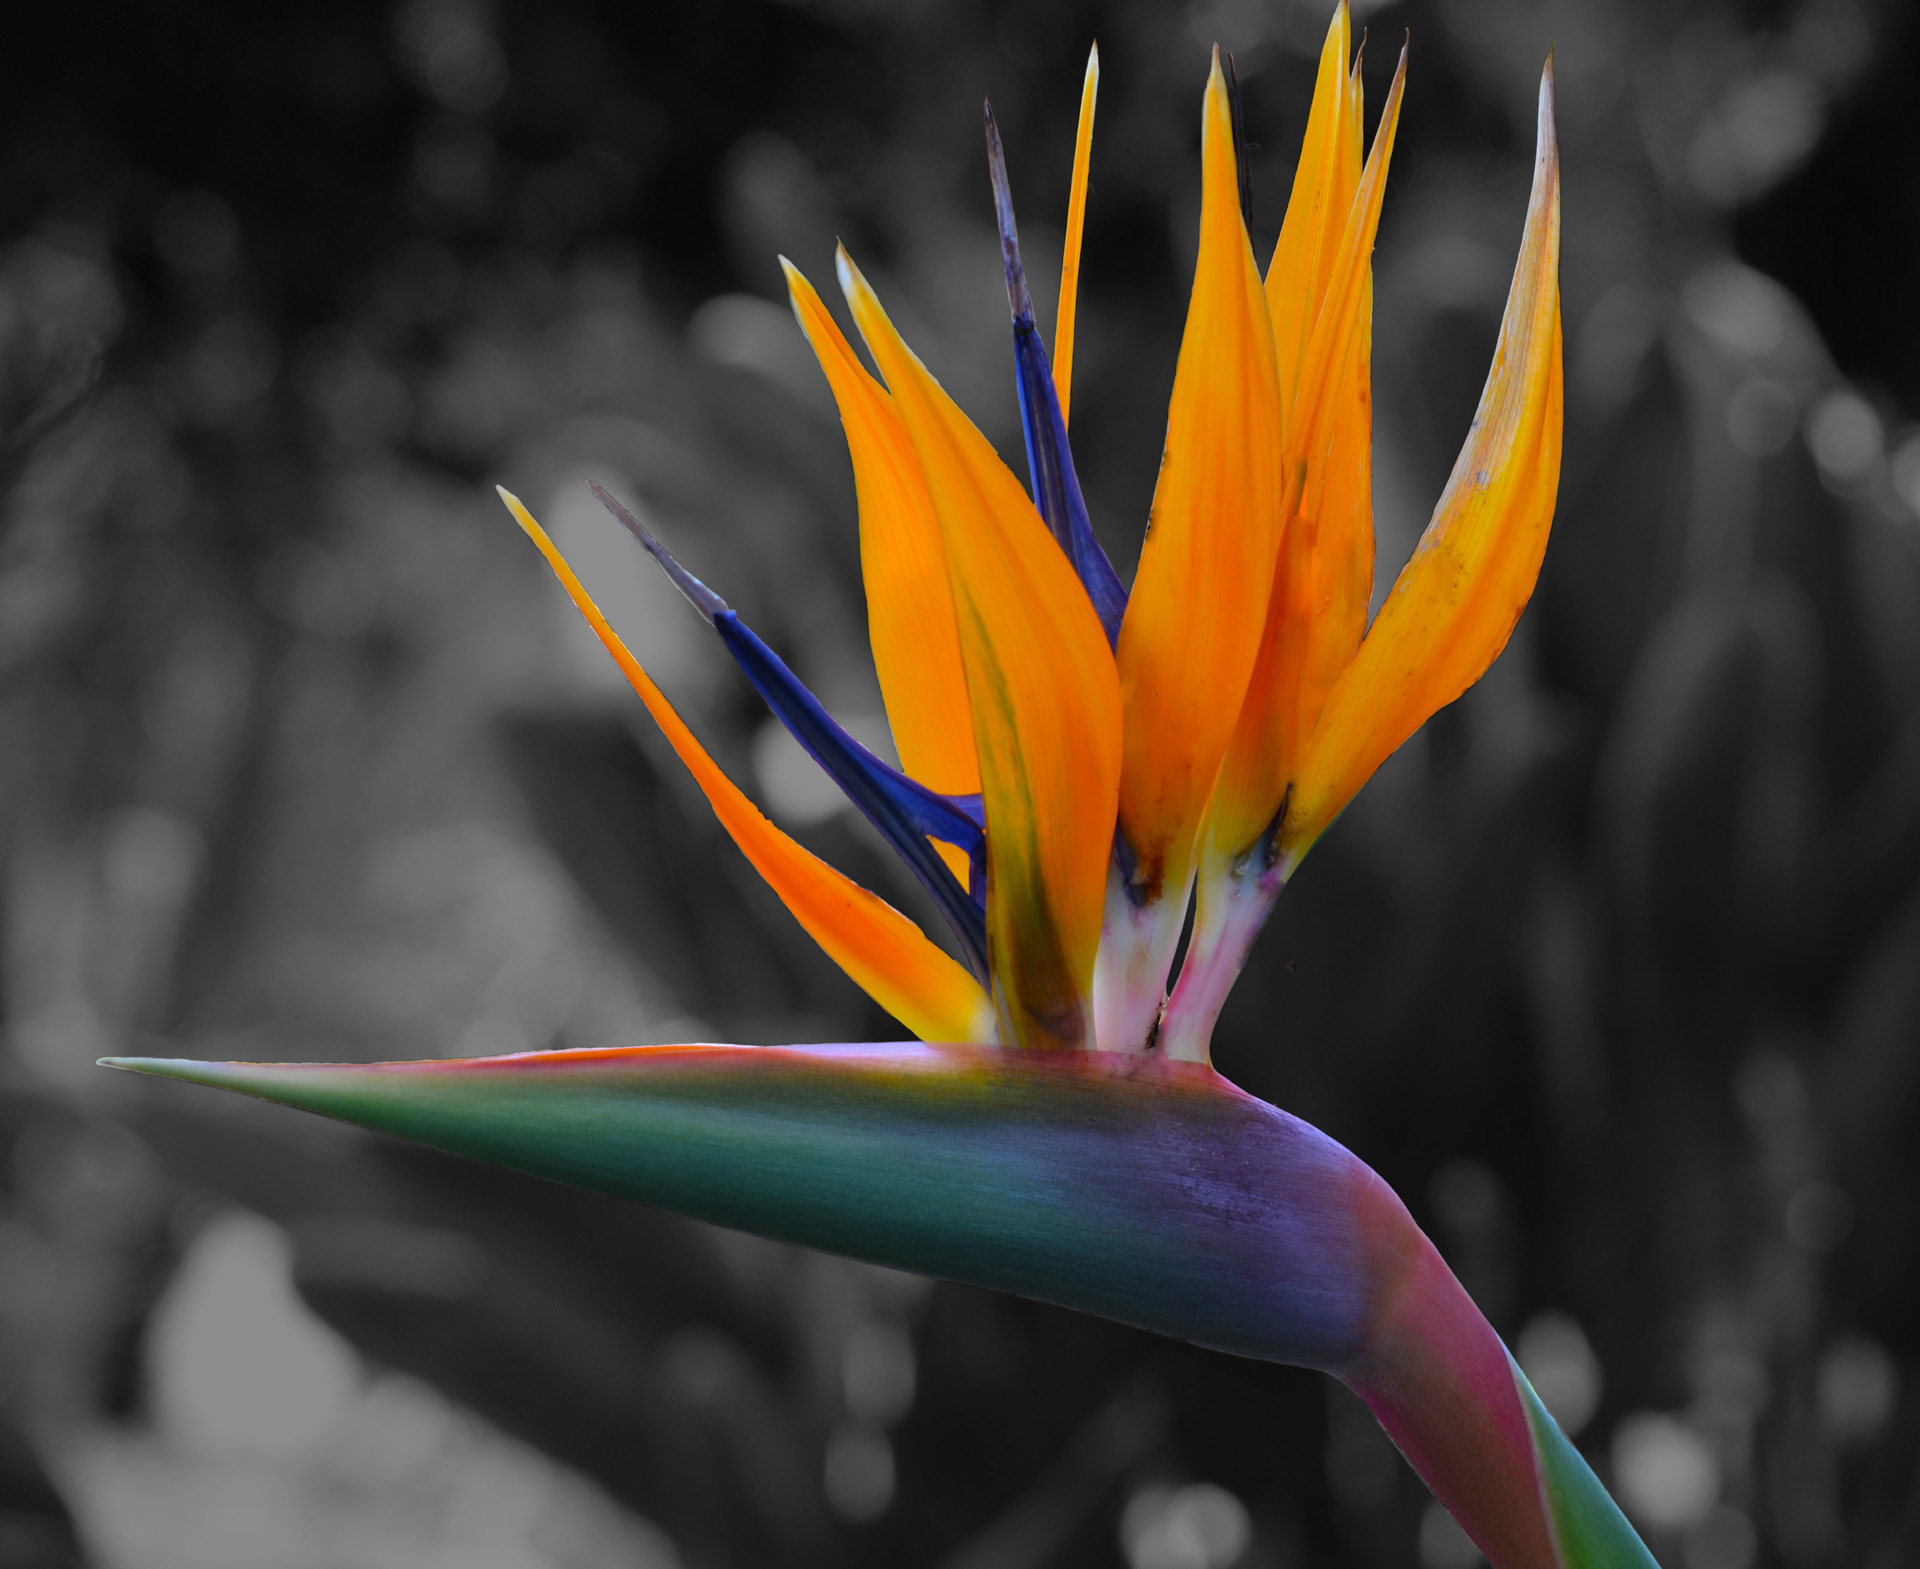 Bird Of Paradise - Images by Debra Casey